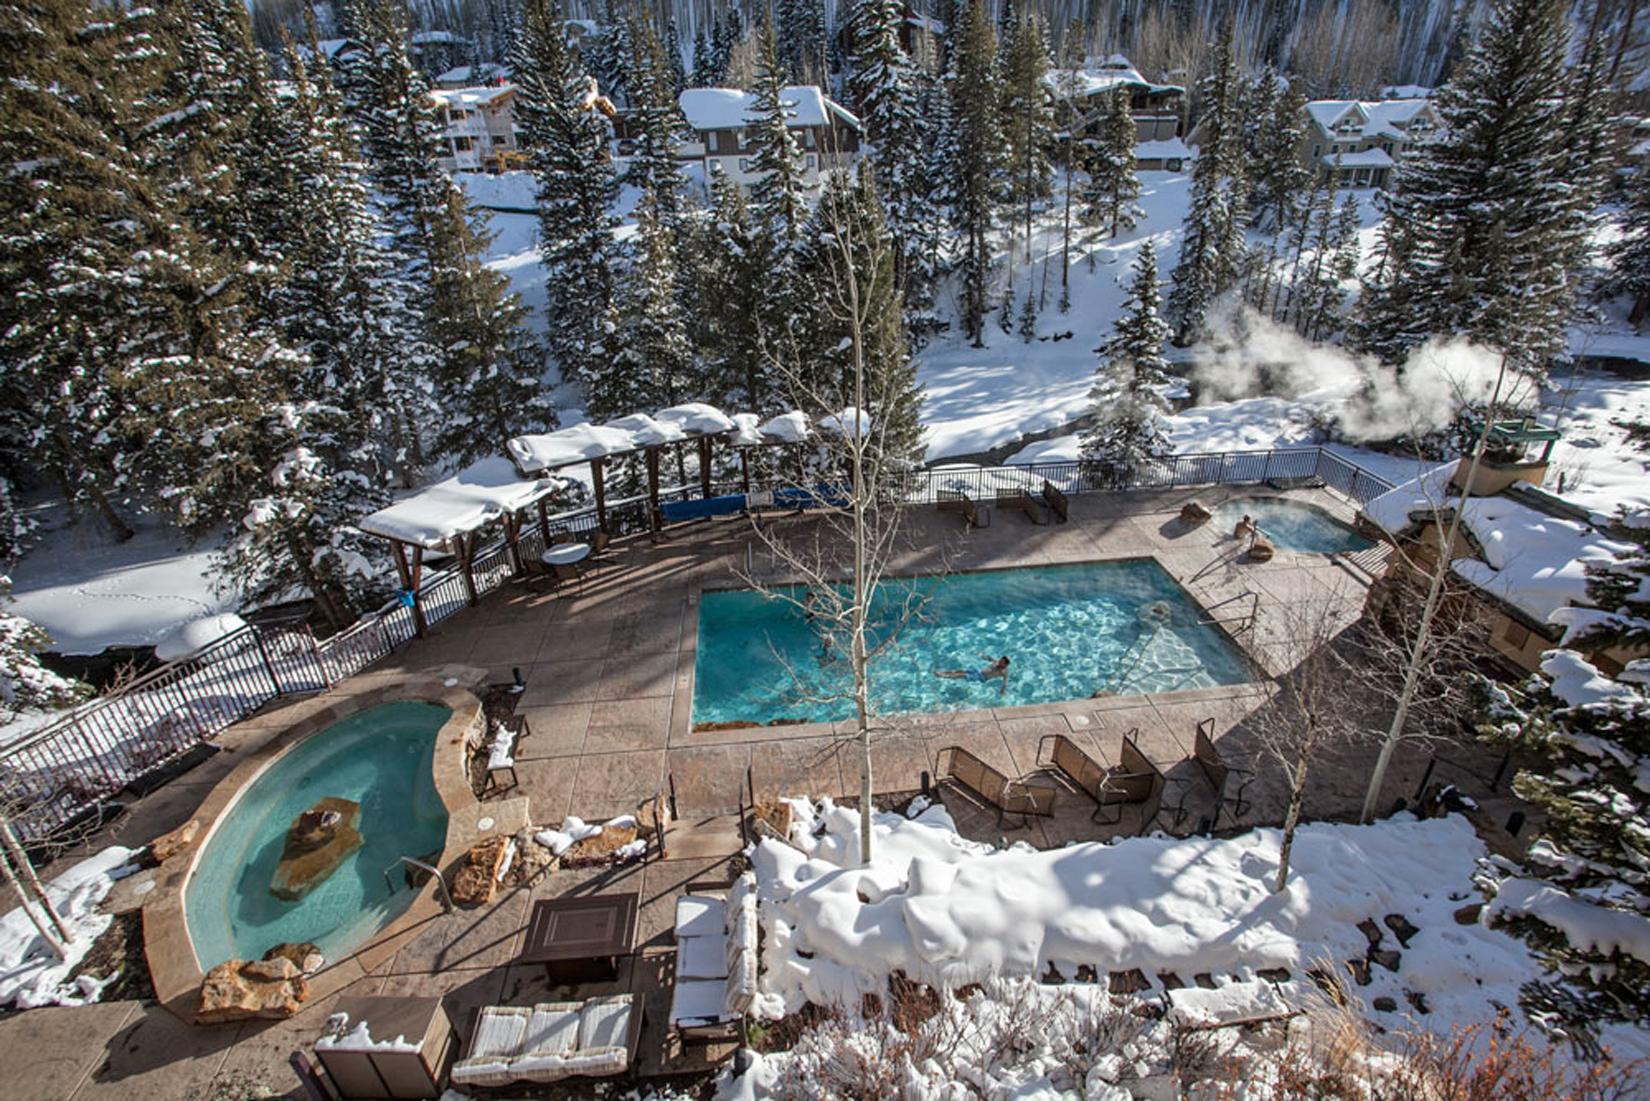 Kids and adults alike love Antlers at Vail hotel’s year-round outdoor pool with views of Vail mountain – and the Chill Out spring break family package includes a free winter-theme pool toy.